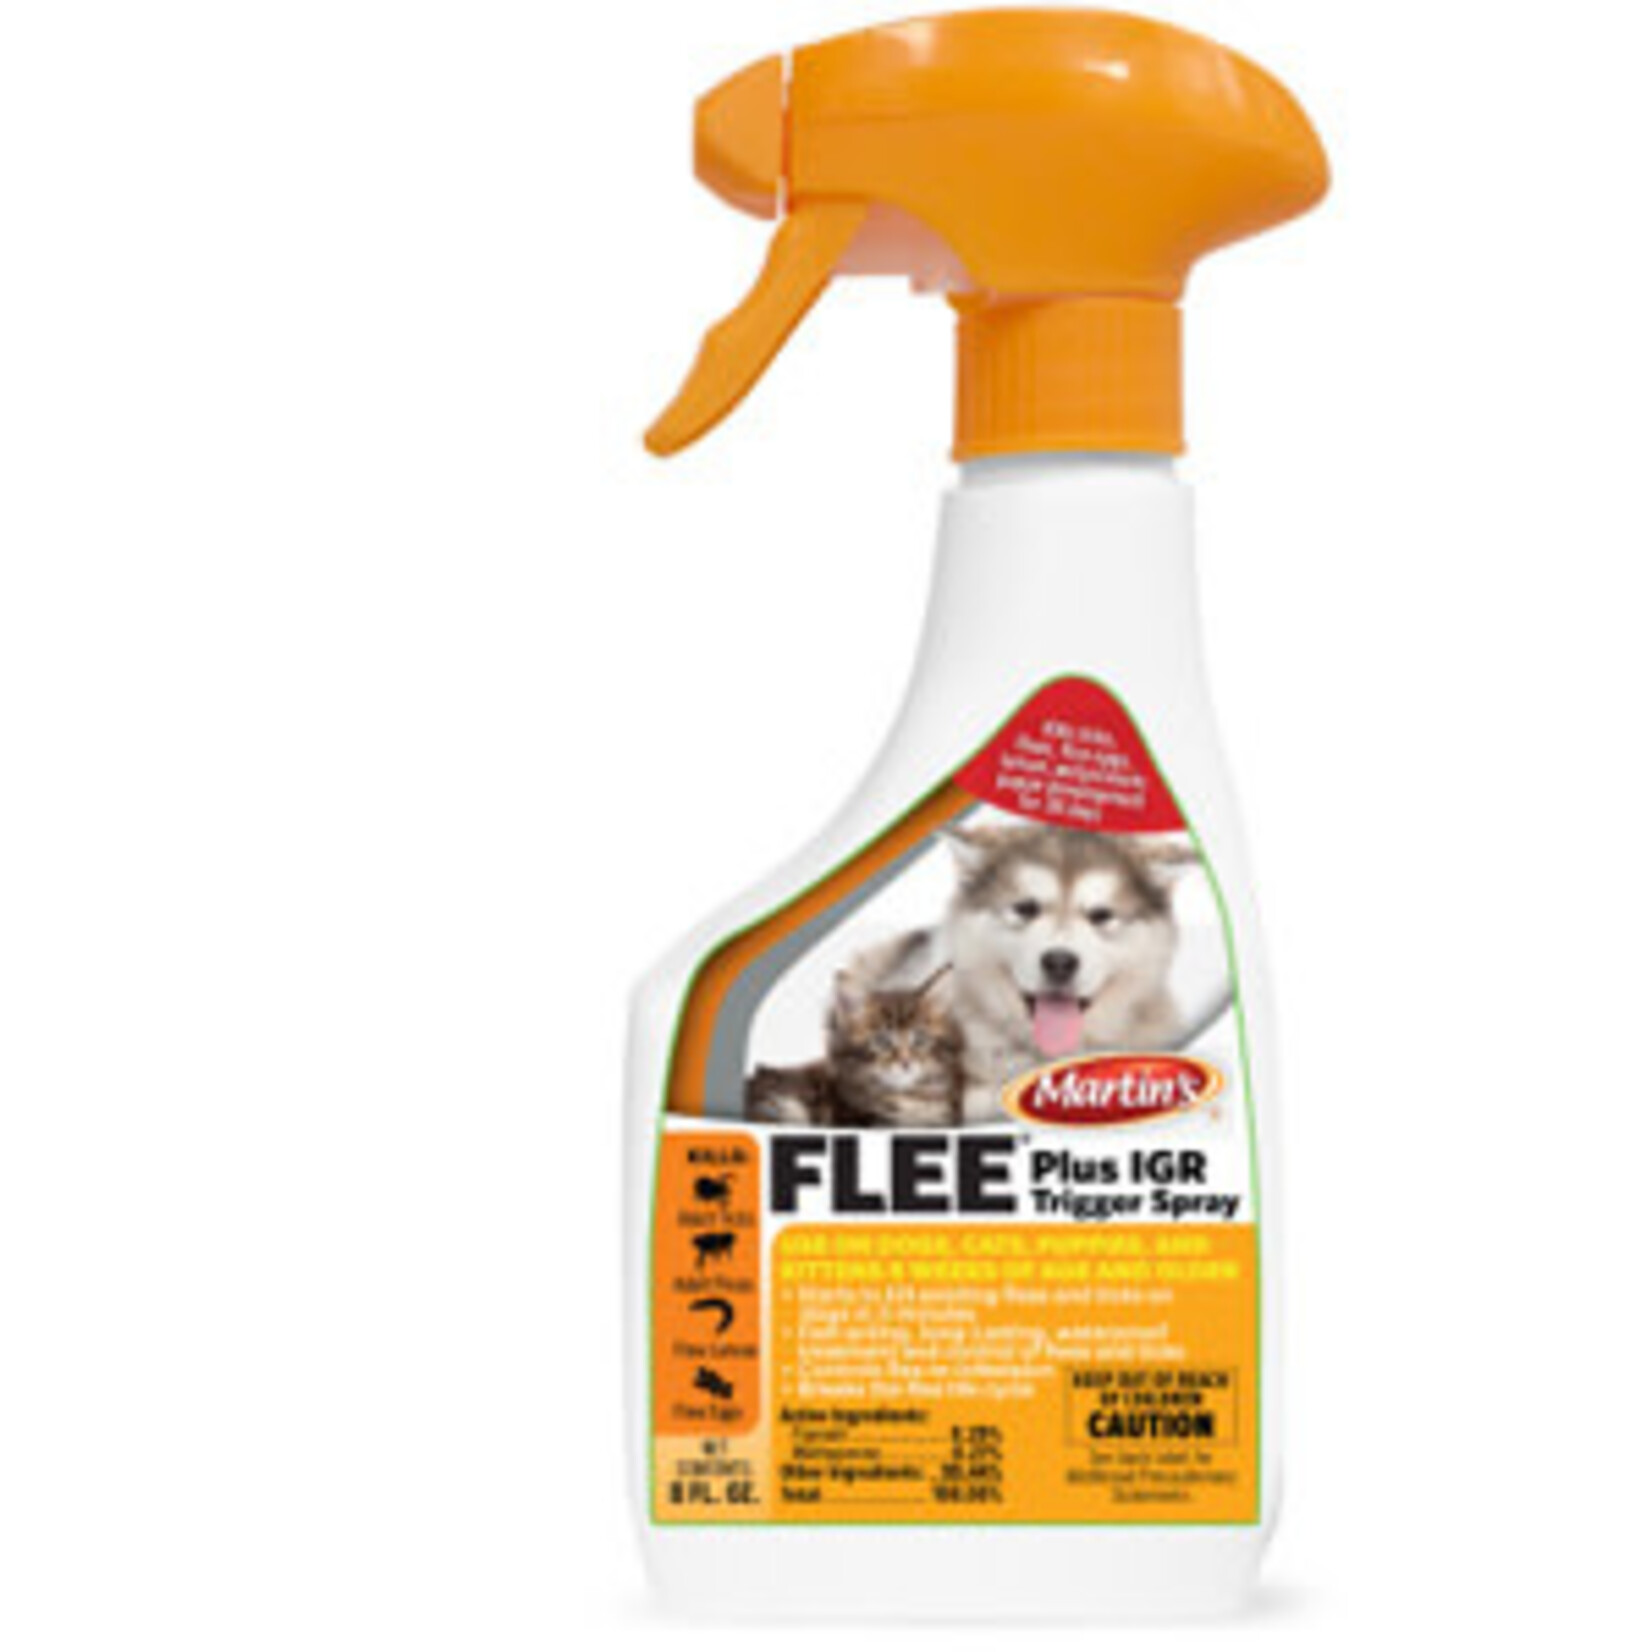 Martin’s Flee Plus IGR Trigger Spray Spray for Dogs and Cats, with Fipronil 8 Oz